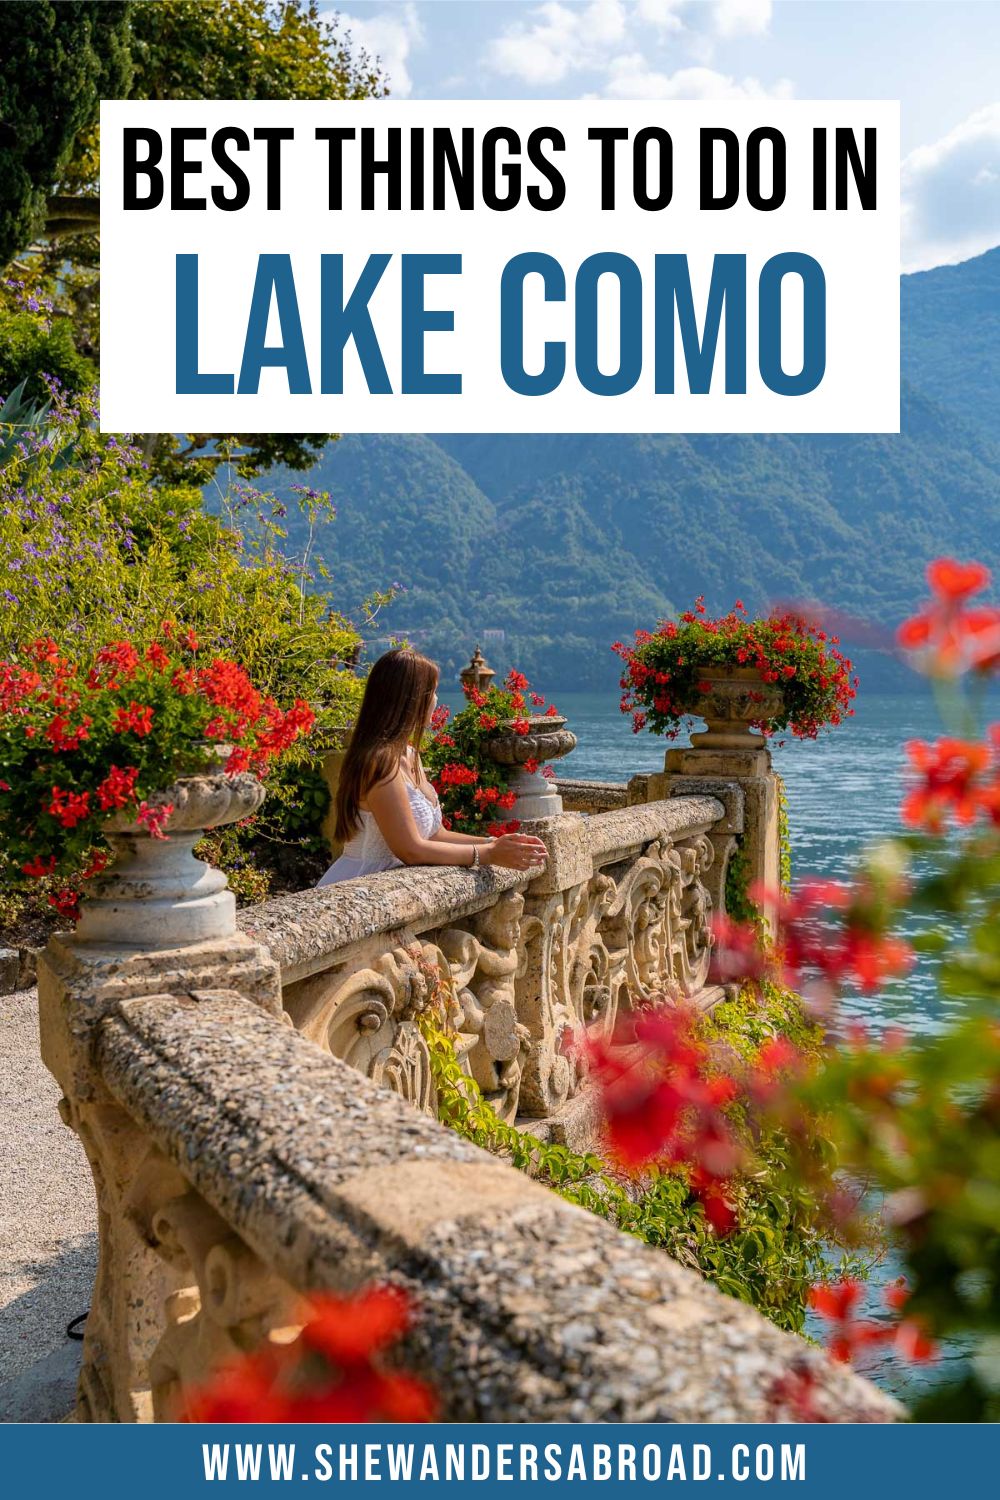 18 Absolute Best Things to Do in Lake Como, Italy